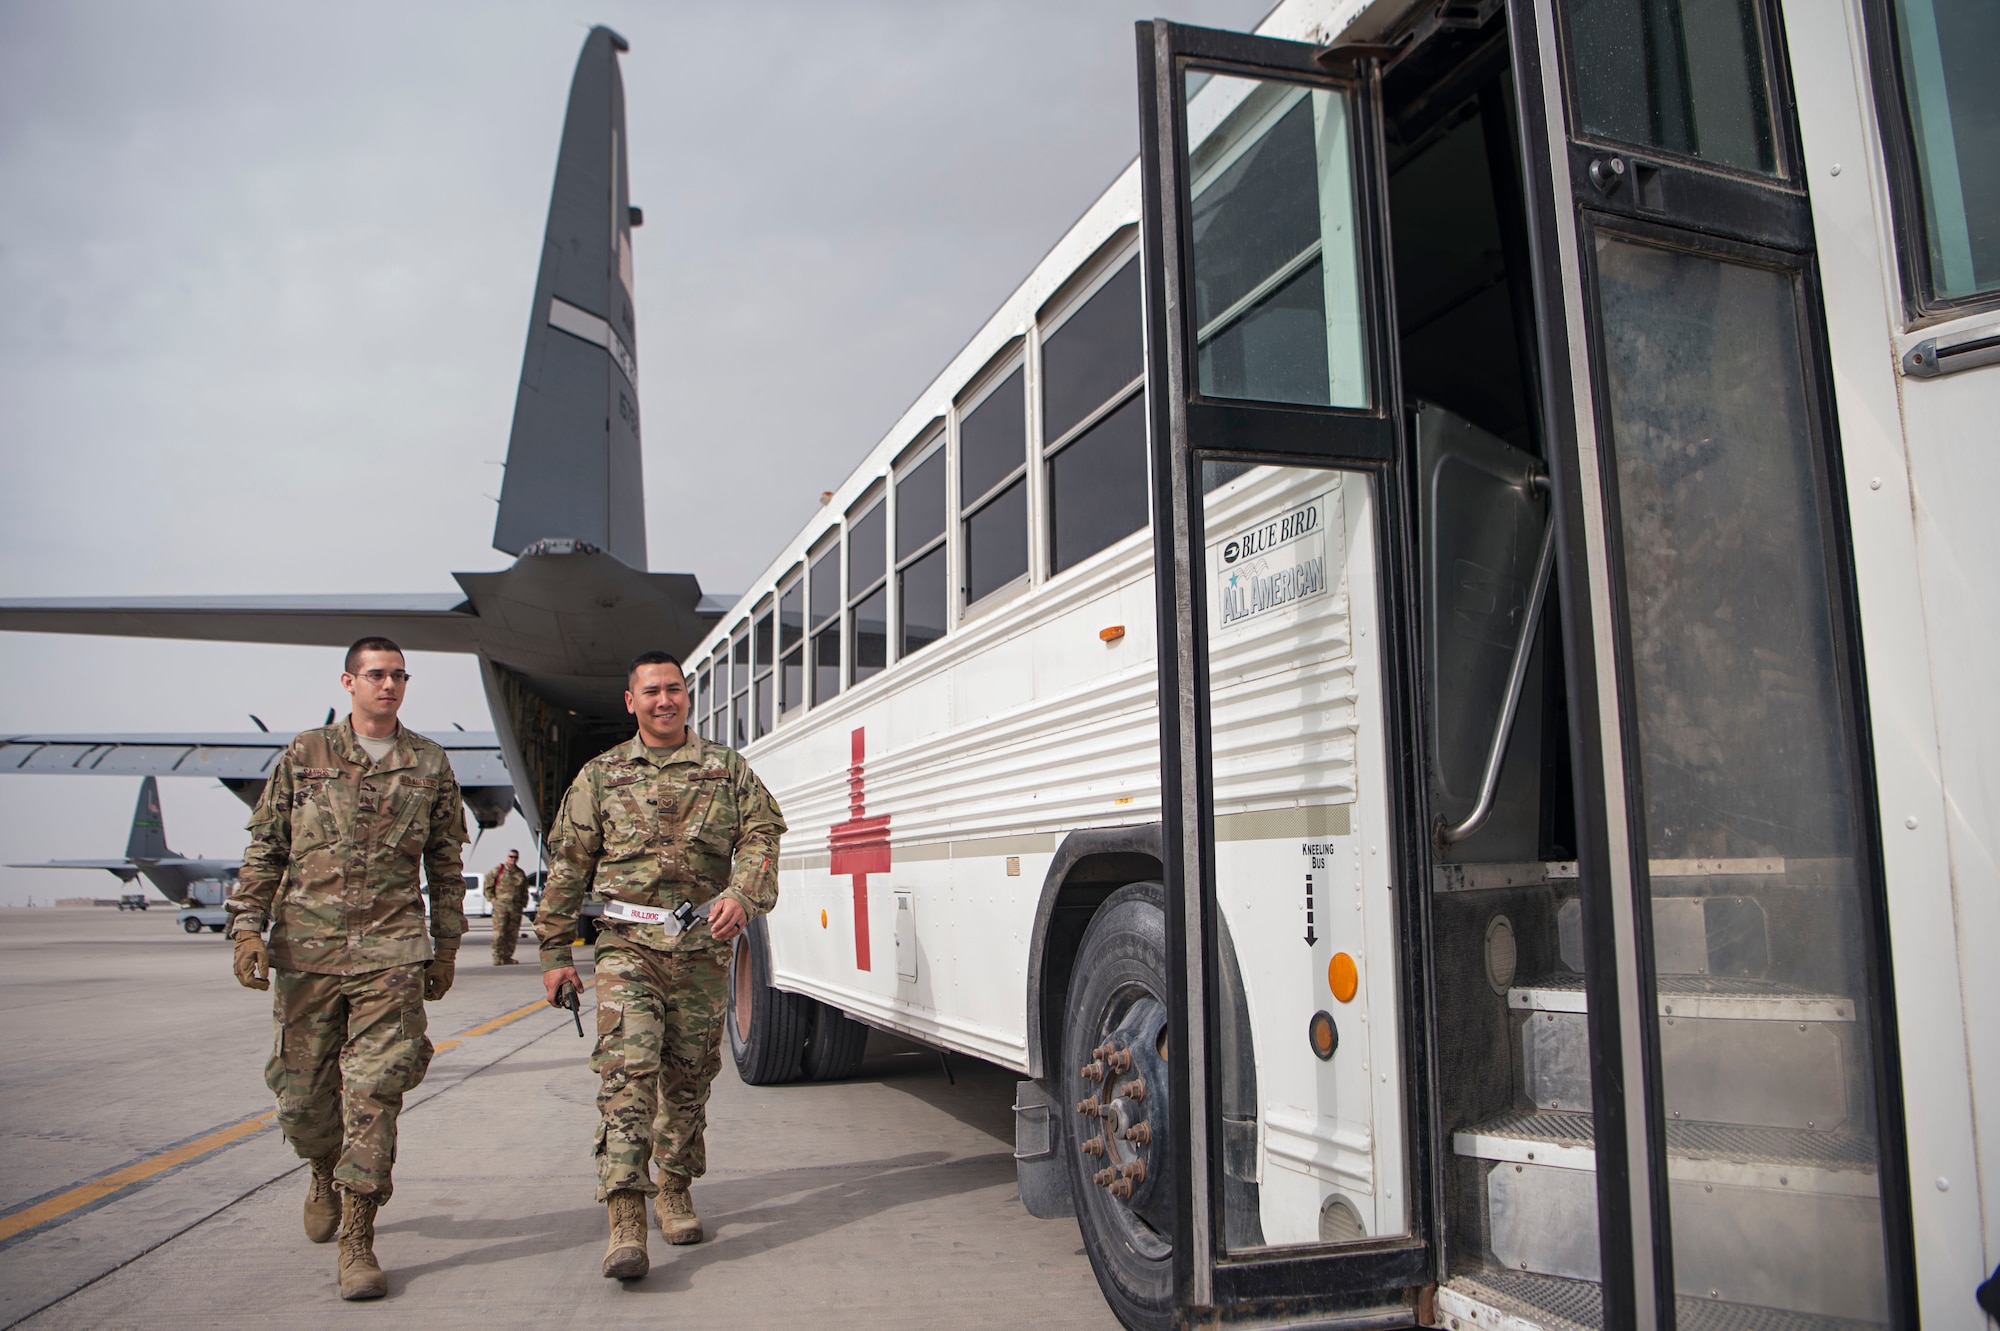 Tech. Sgt. Clauber Santos, left, 379th Expeditionary Medical Support Squadron (EMDSS) En Route Patient Staging (ERPS) Intra-Theater Care Program NCO in charge, and Staff Sgt. Daniel Sarsona, 379th EMDSS ERPS referral management NCO in charge, make their way onto a medical bus after loading in-transit patients and their luggage Feb. 27, 2019, at Al Udeid Air Base, Qatar. Airmen at the 379th EMDSS’s ERPS facility work at both the clinic and on the flightline to ensure safe transport and care is provided to in-transit patients during their stay at Al Udeid before they are moved to locations supporting higher levels of medical treatment, if necessary. (U.S. Air Force photo by Tech. Sgt. Christopher Hubenthal)